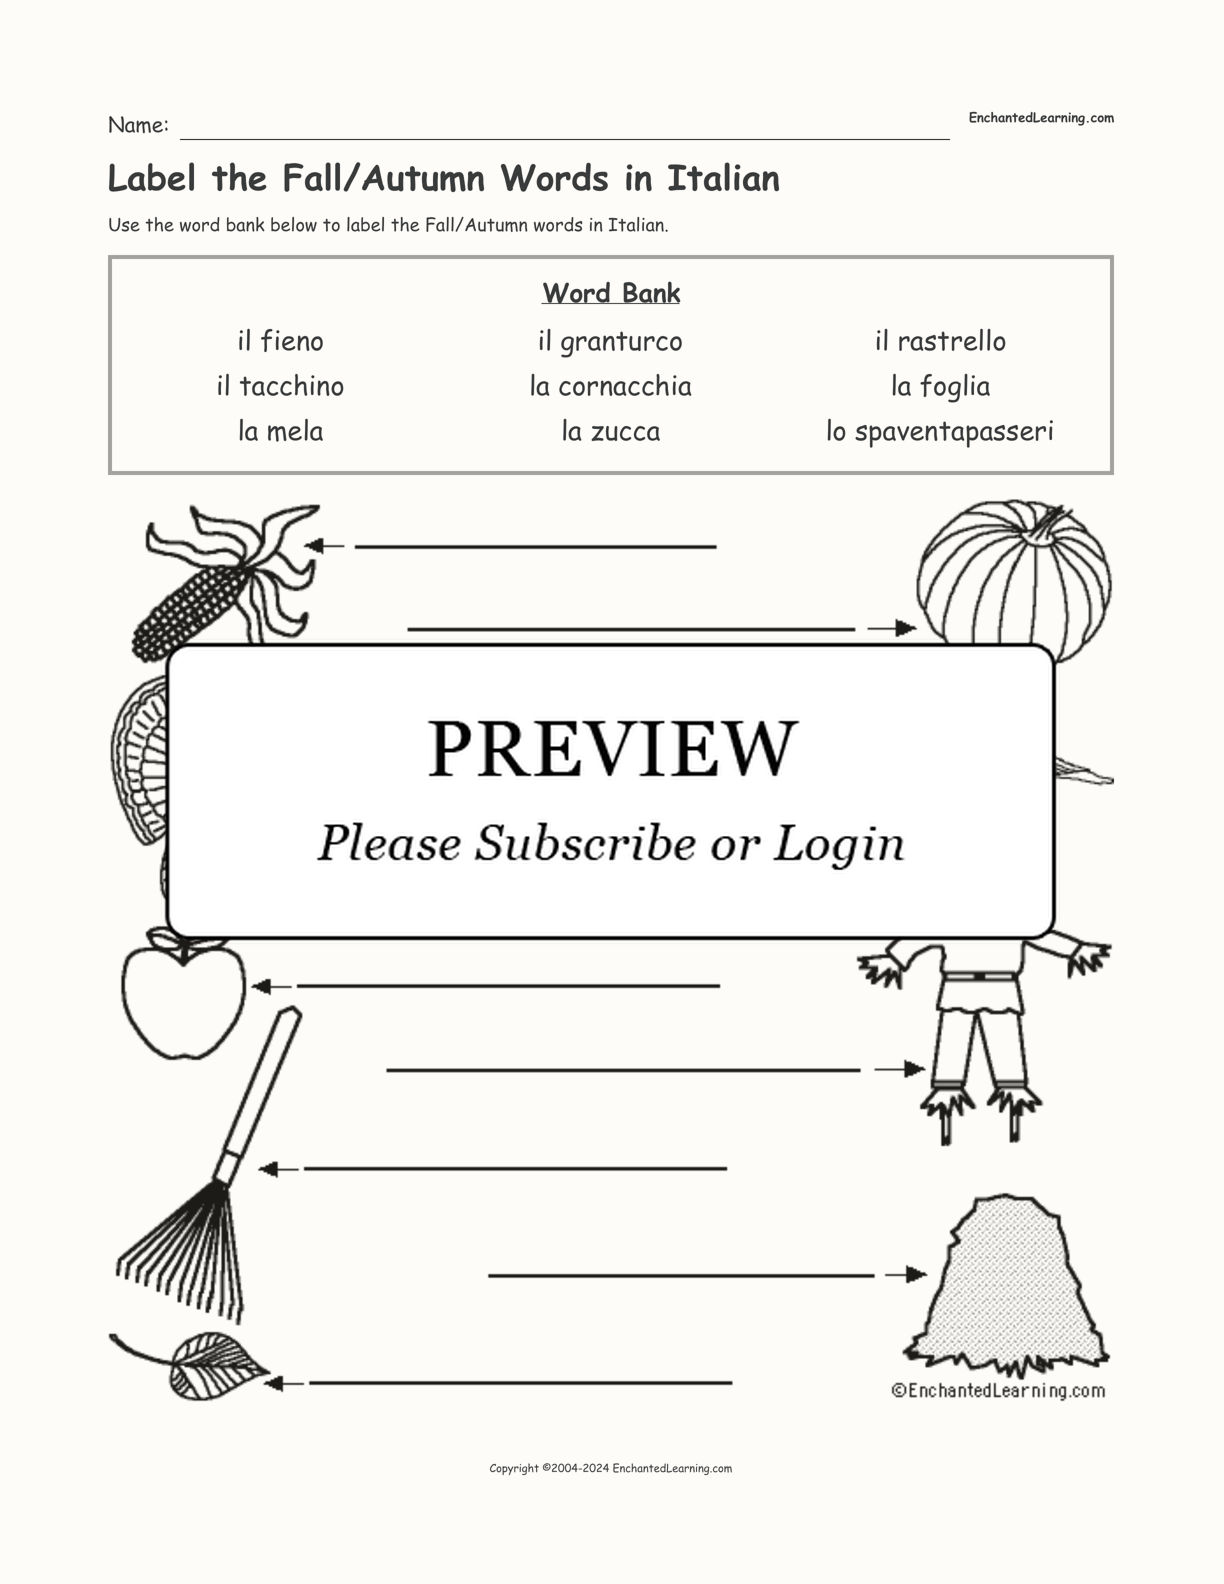 Label the Fall/Autumn Words in Italian interactive worksheet page 1